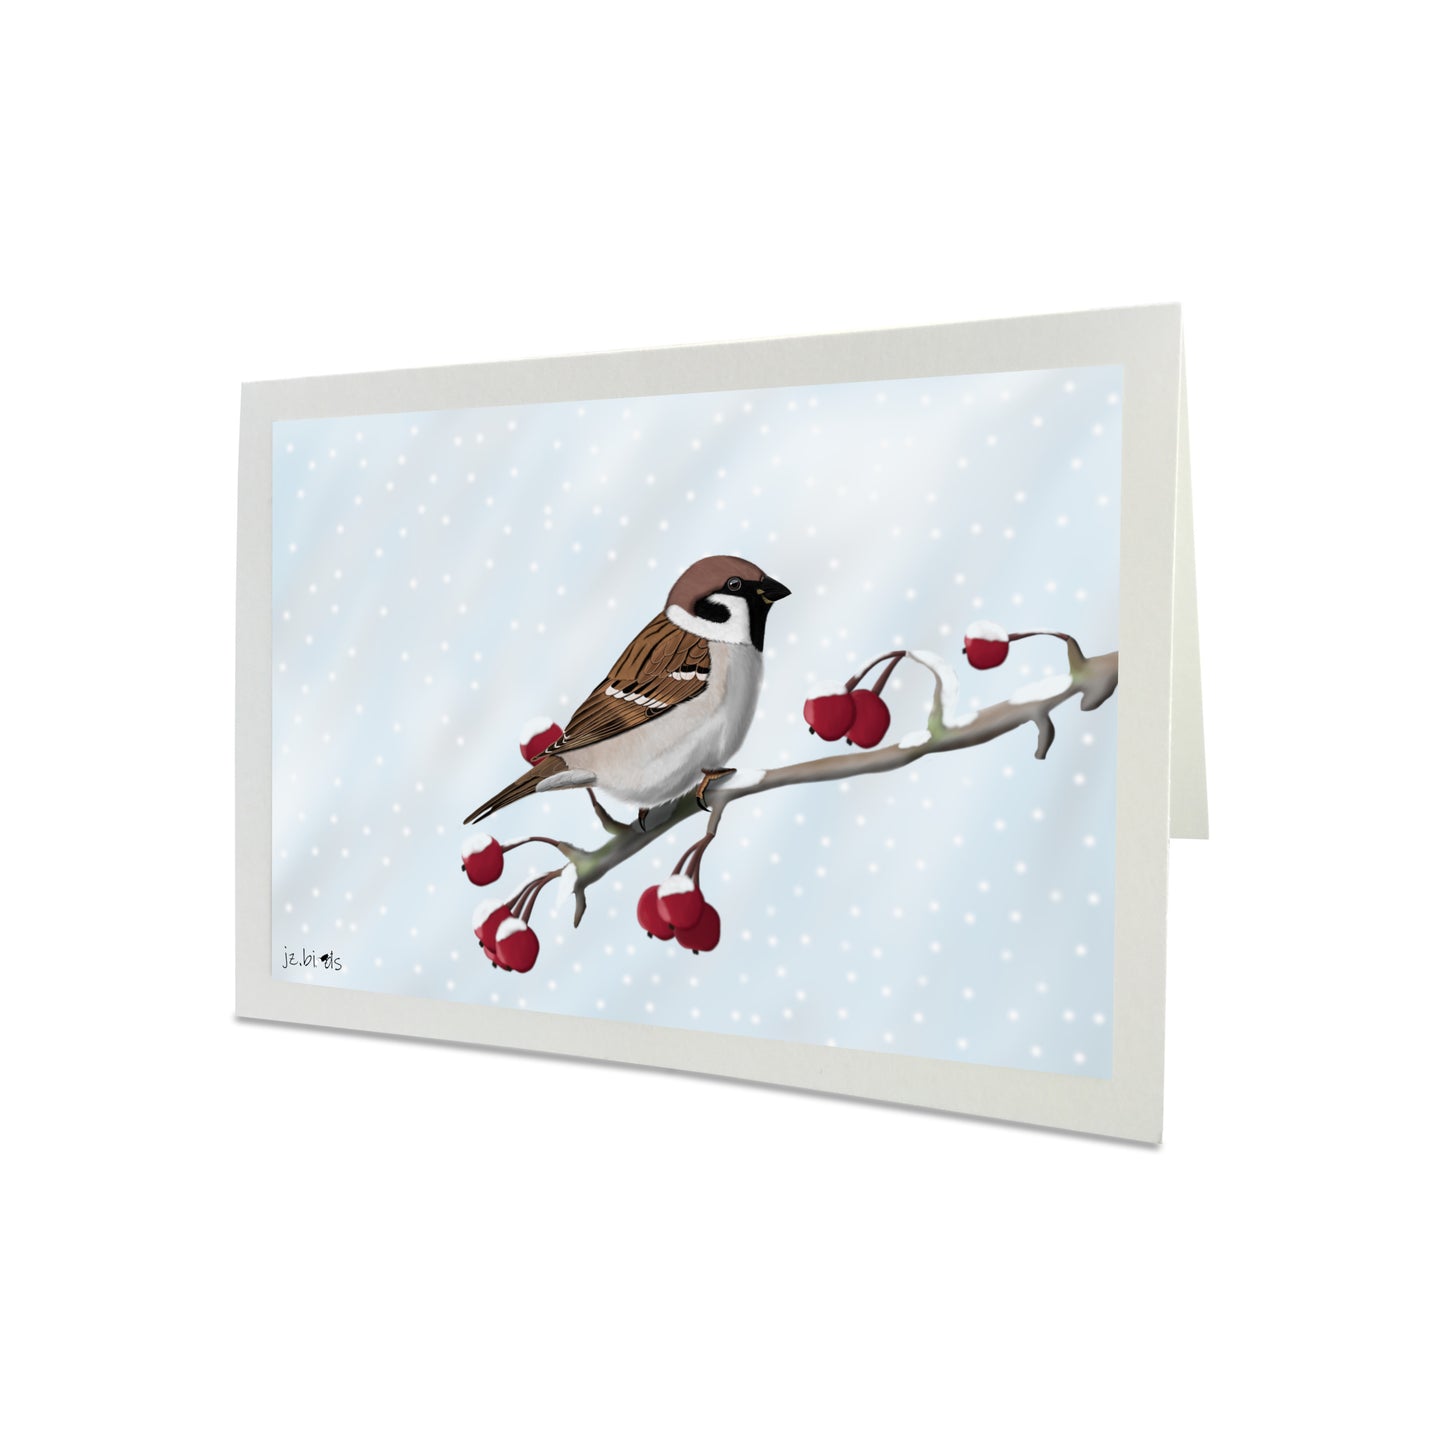 Tree Sparrow Bird on a Winter Branch Greeting Card